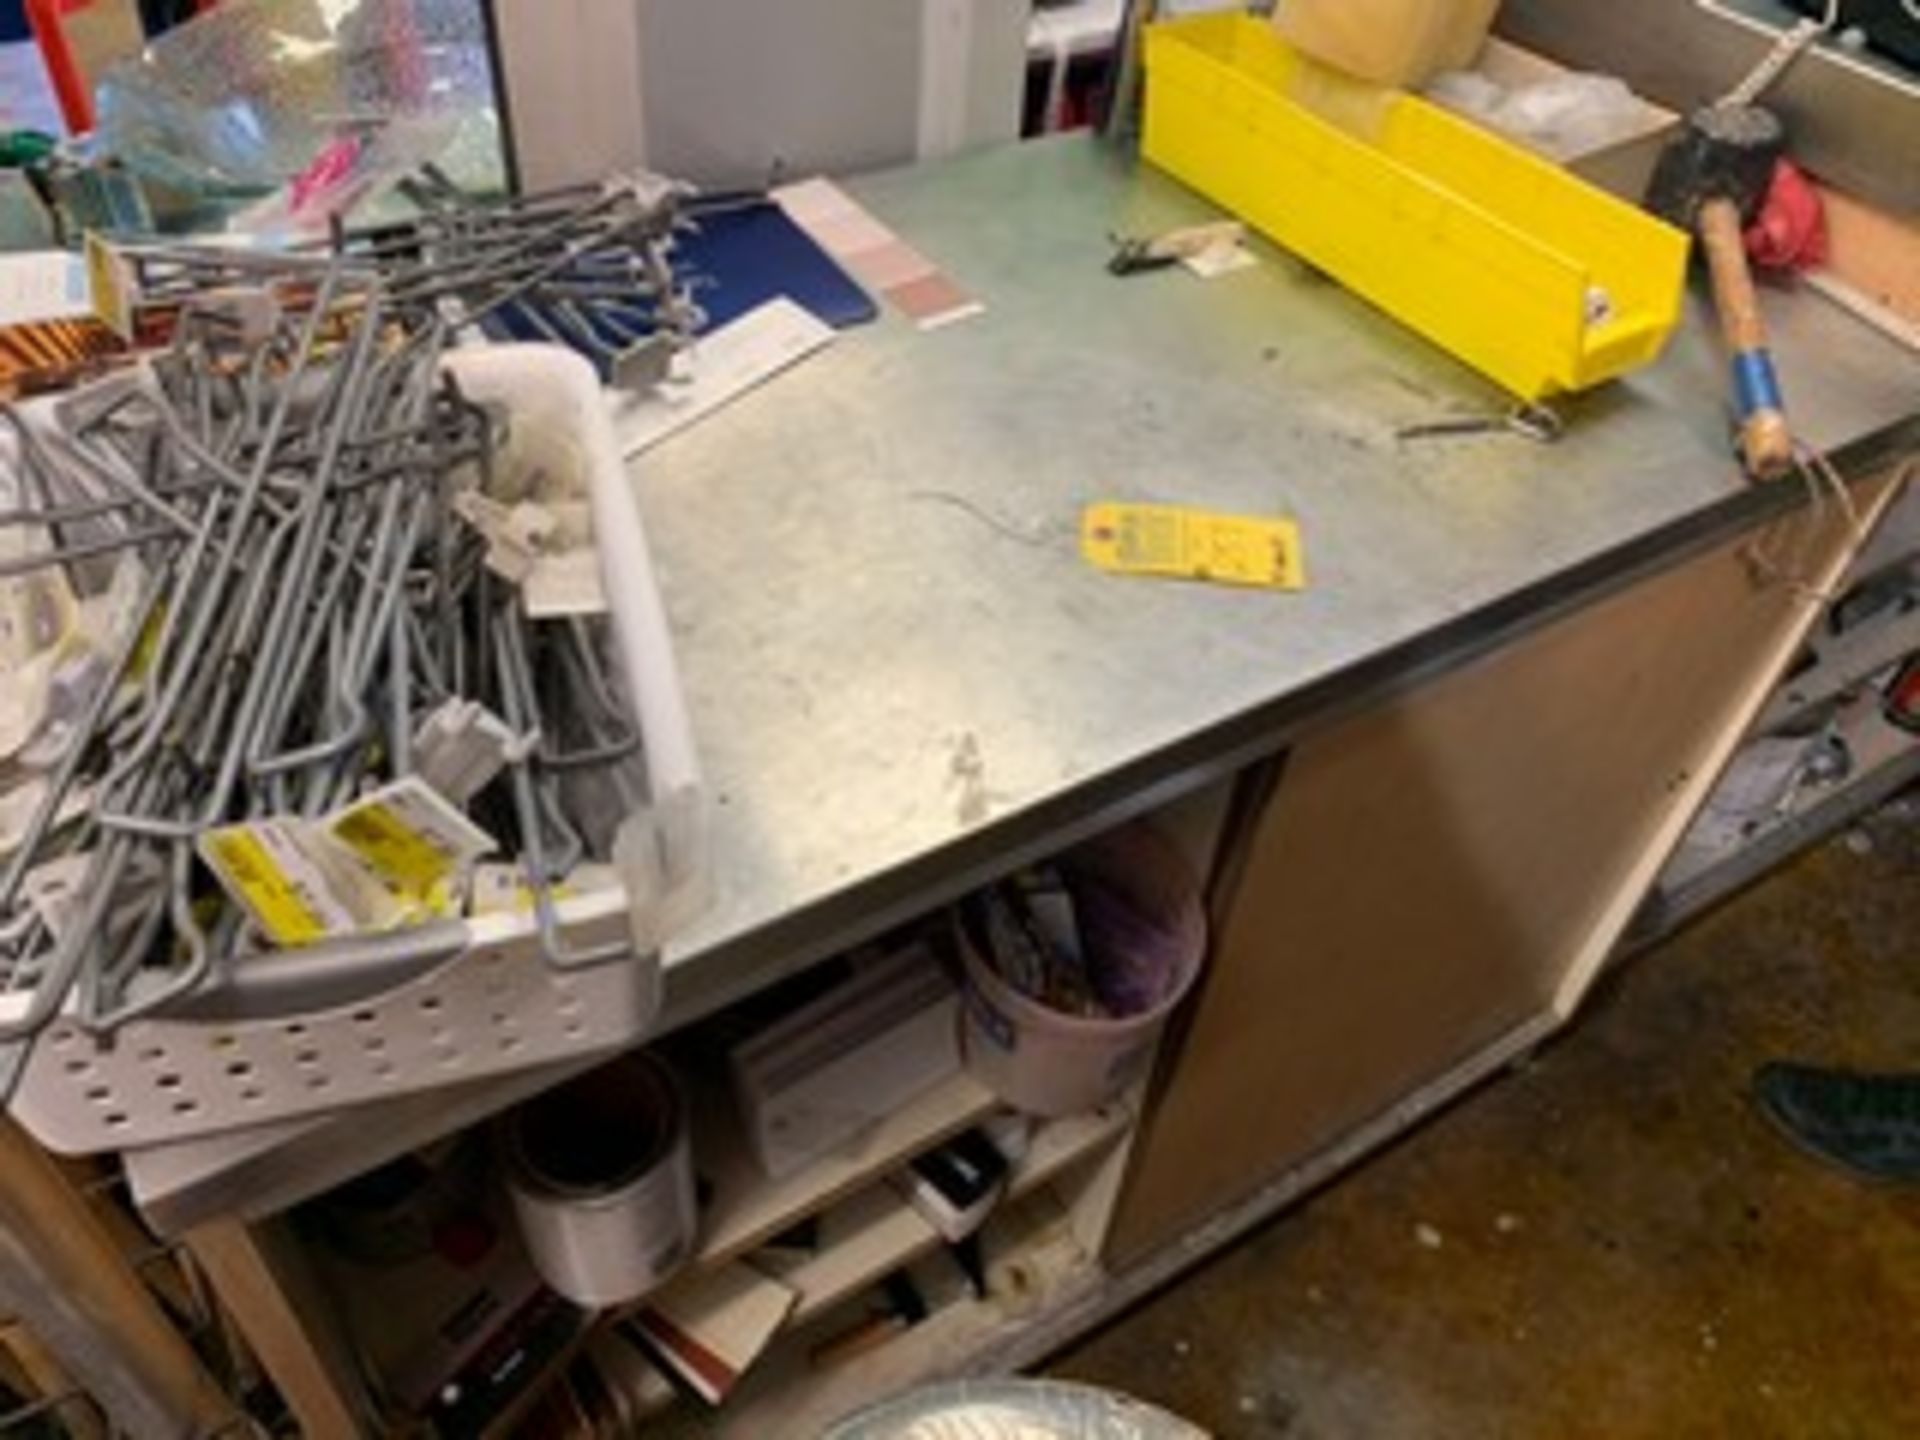 STAINLESS STEEL CABINETS - NO CONTENTS